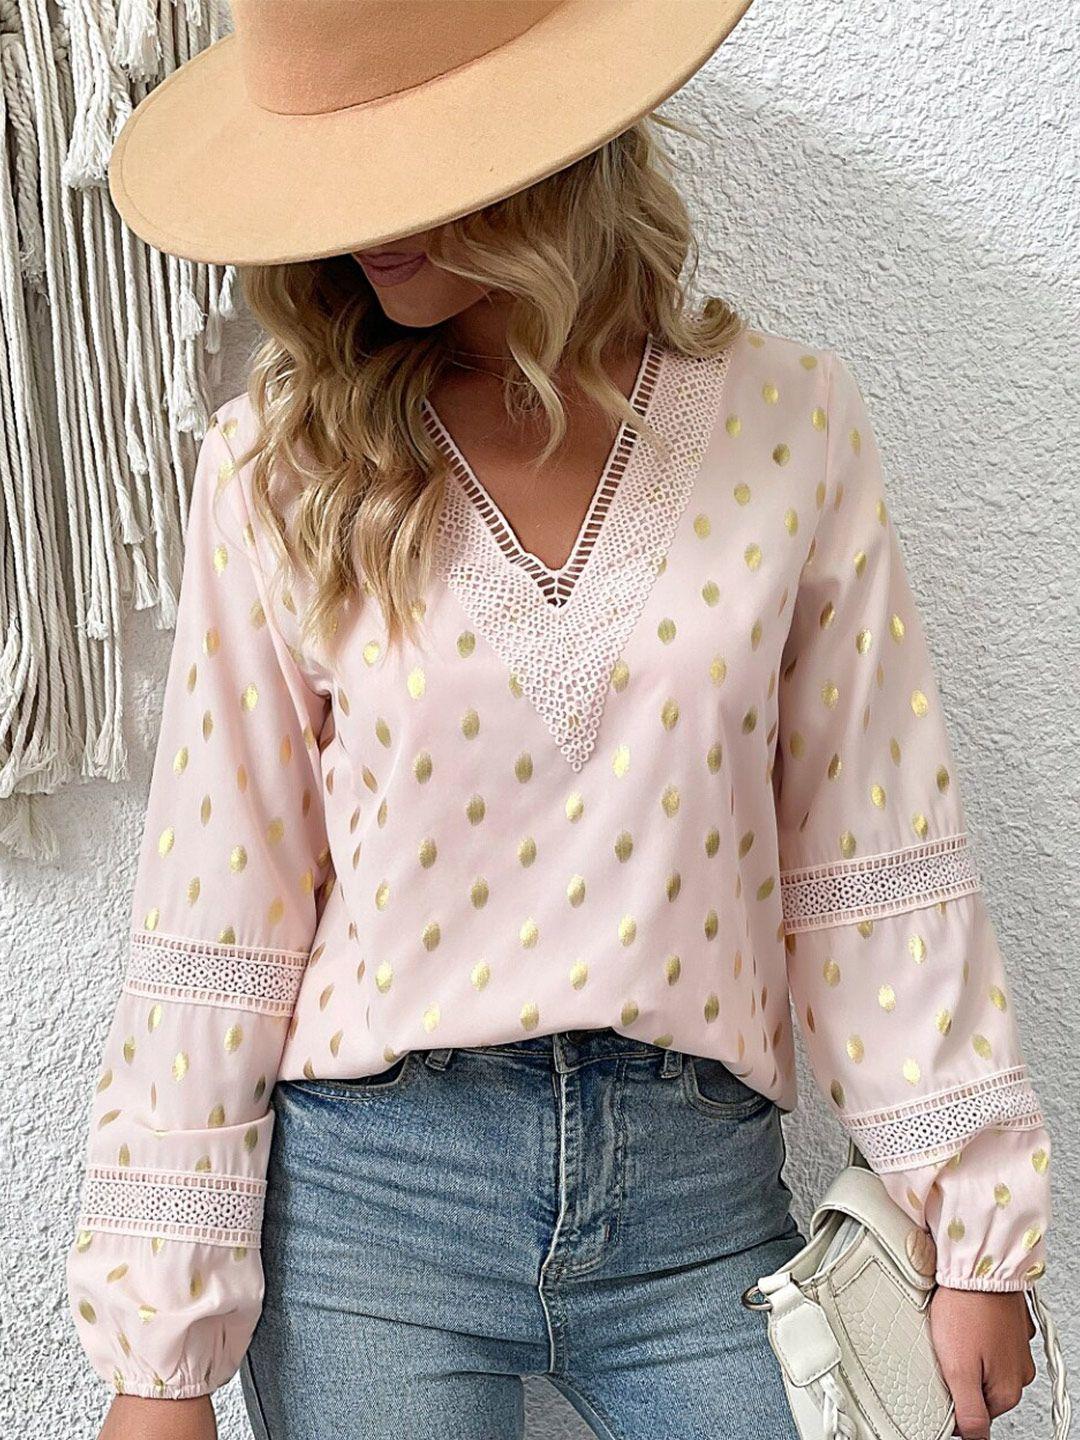 stylecast pink polka dots printed lace inserts top